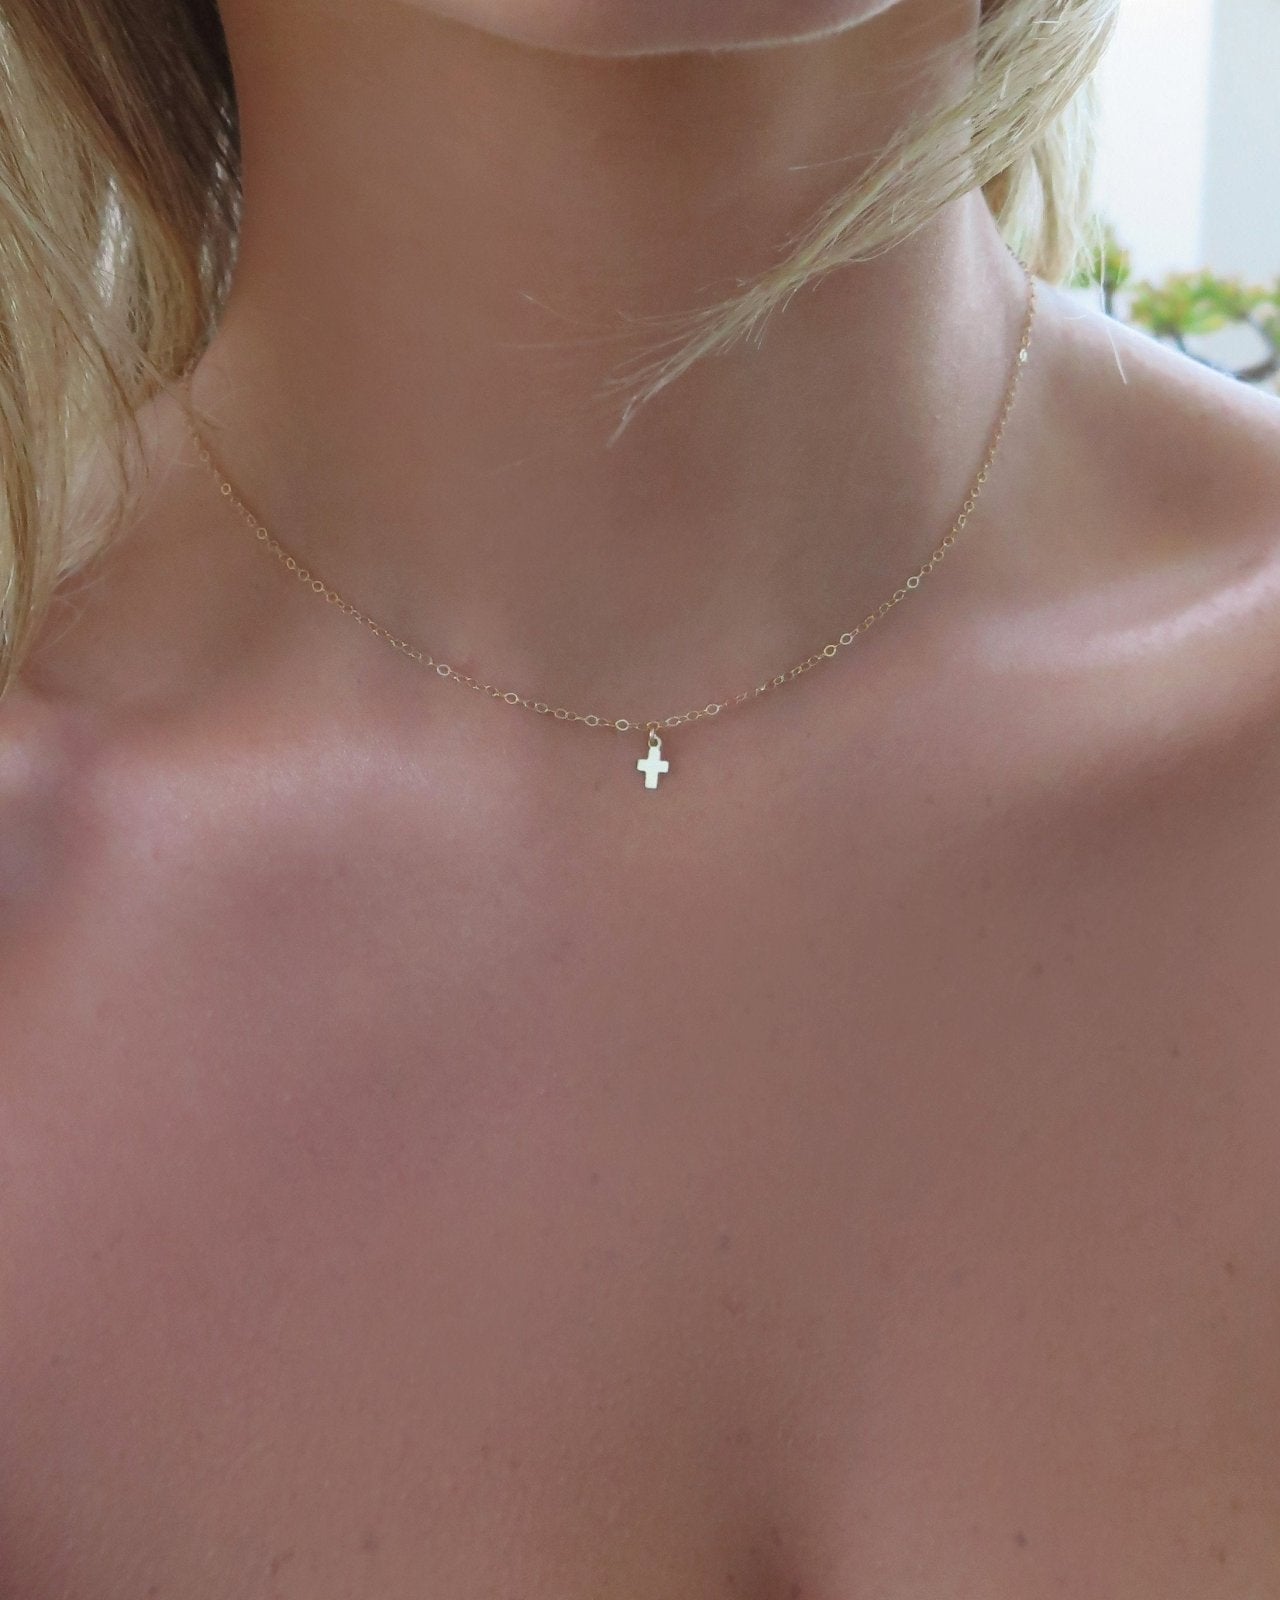 SINGLE CROSS NECKLACE - The Littl - 14k Yellow Gold Fill - Deluxe Chain